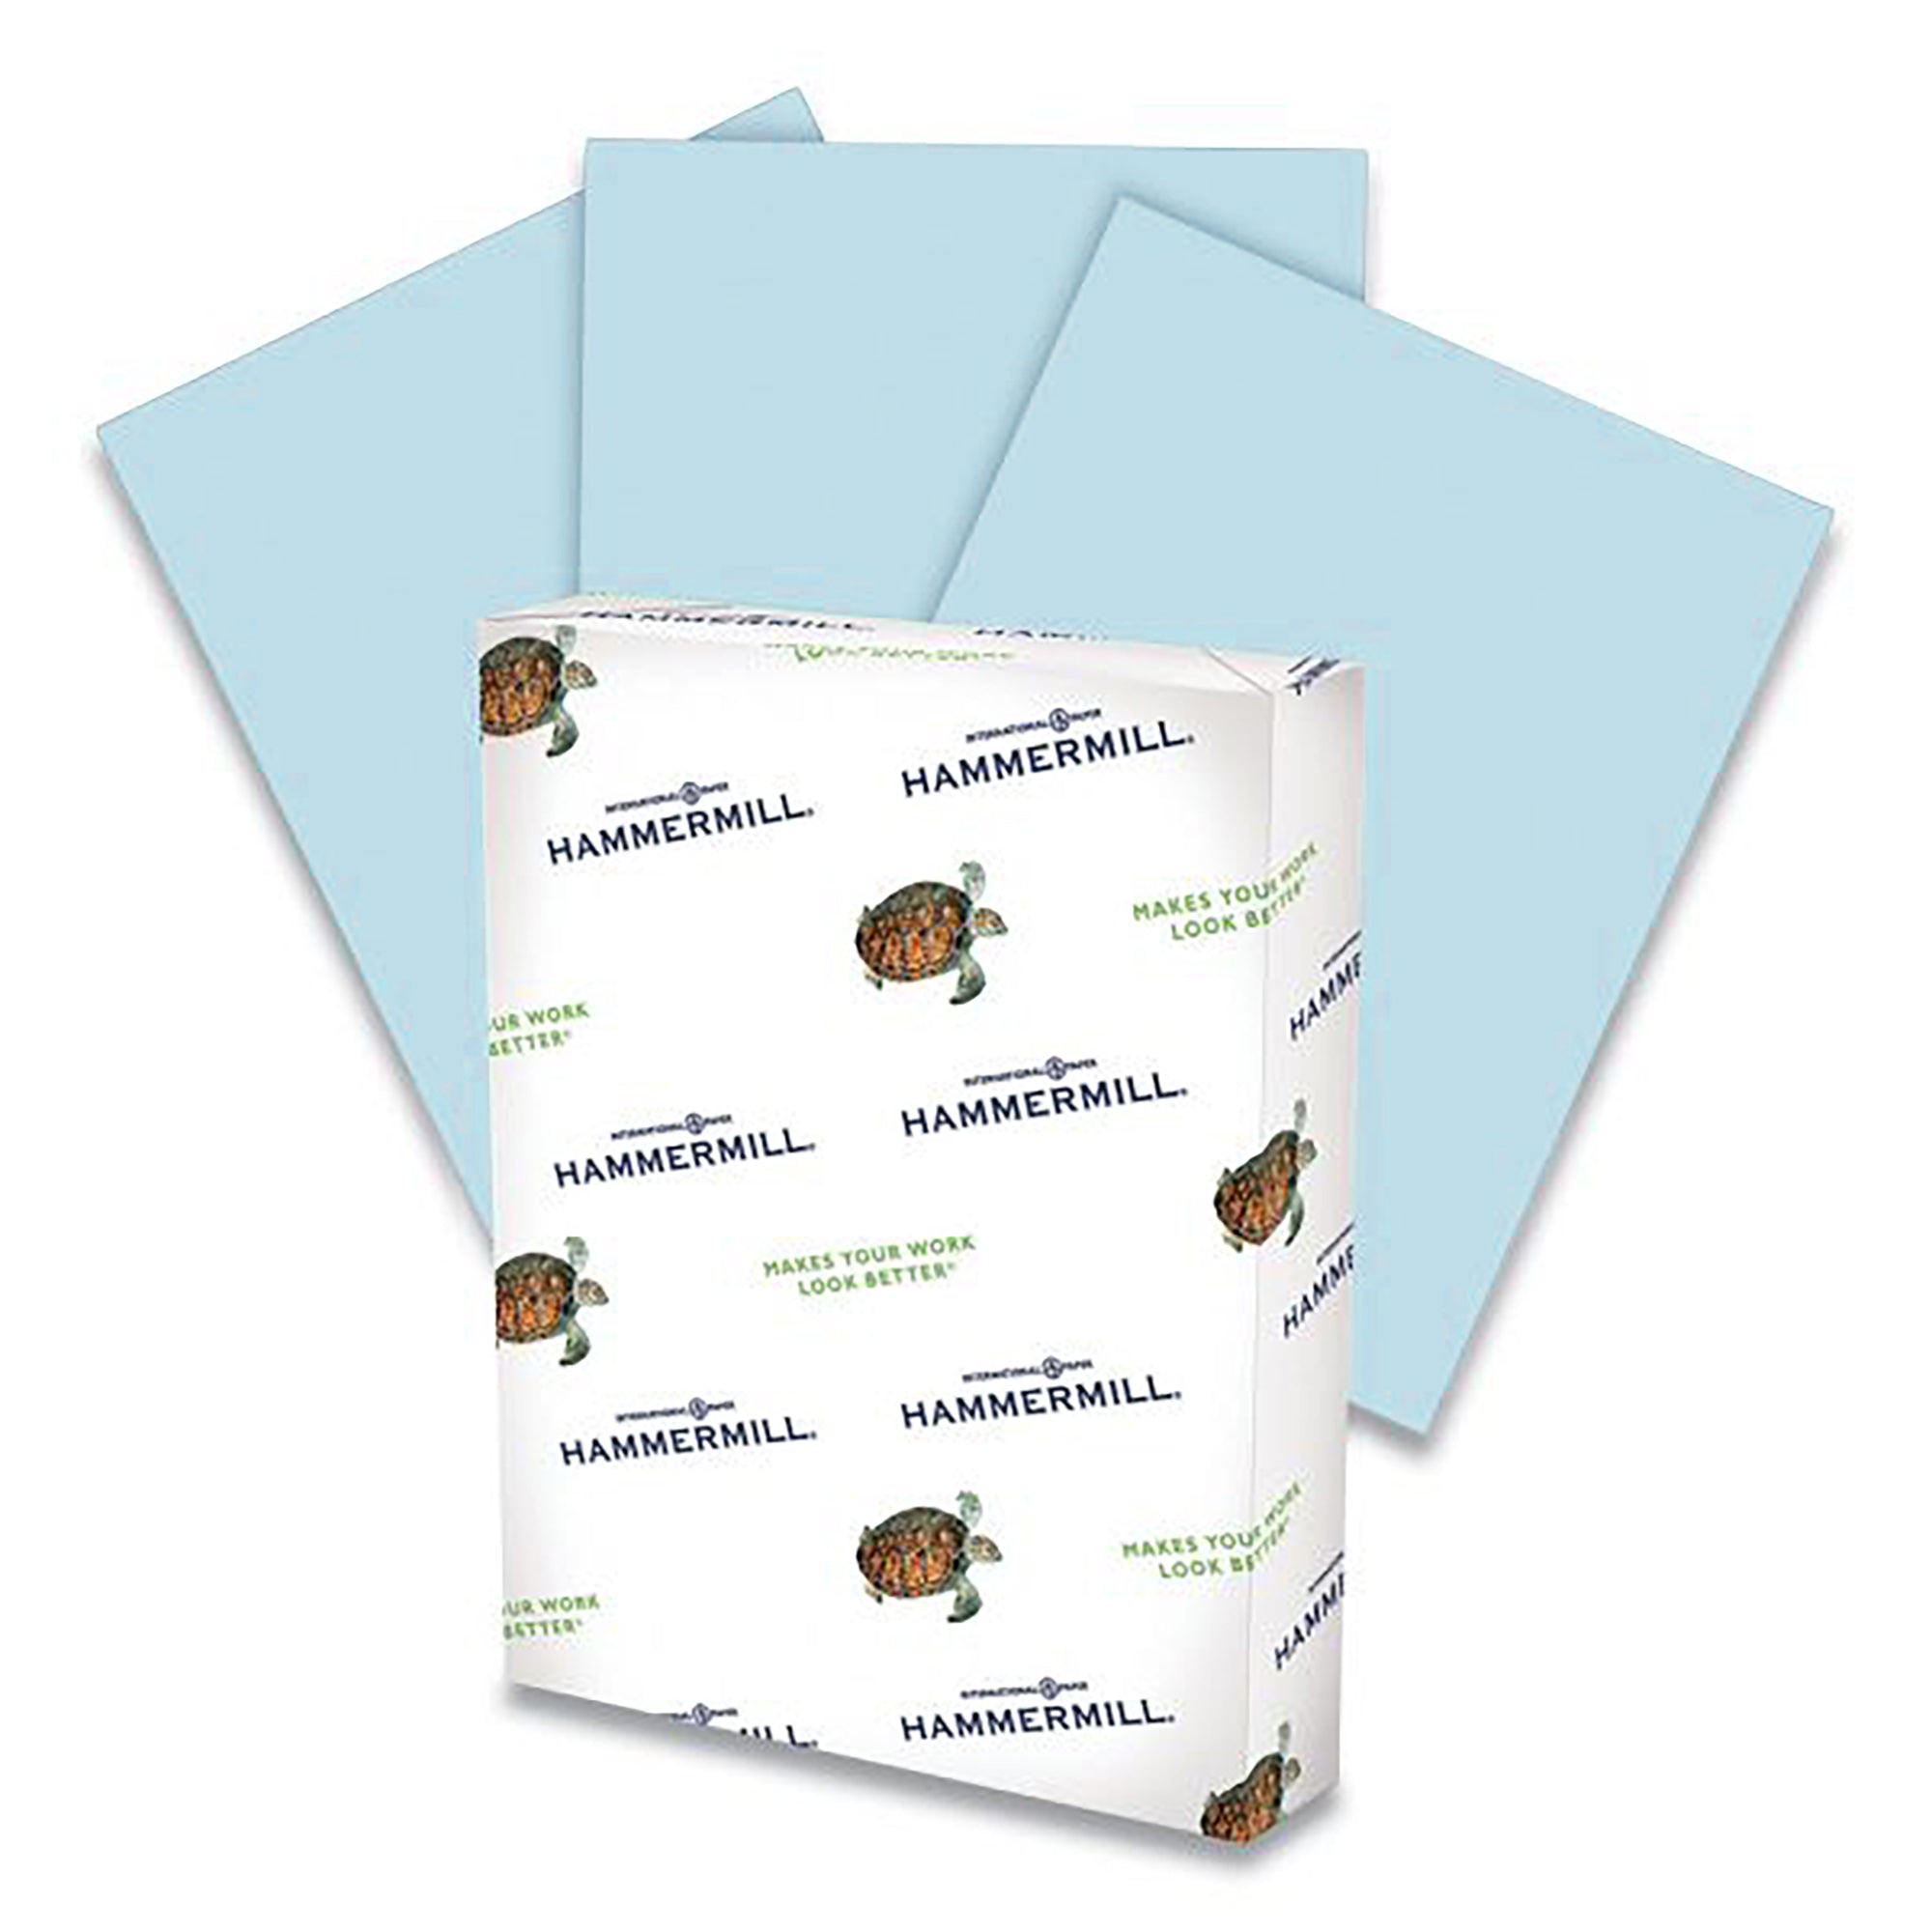 Colored Stationery Paper, Colored Papers Print, Color Paper Printer